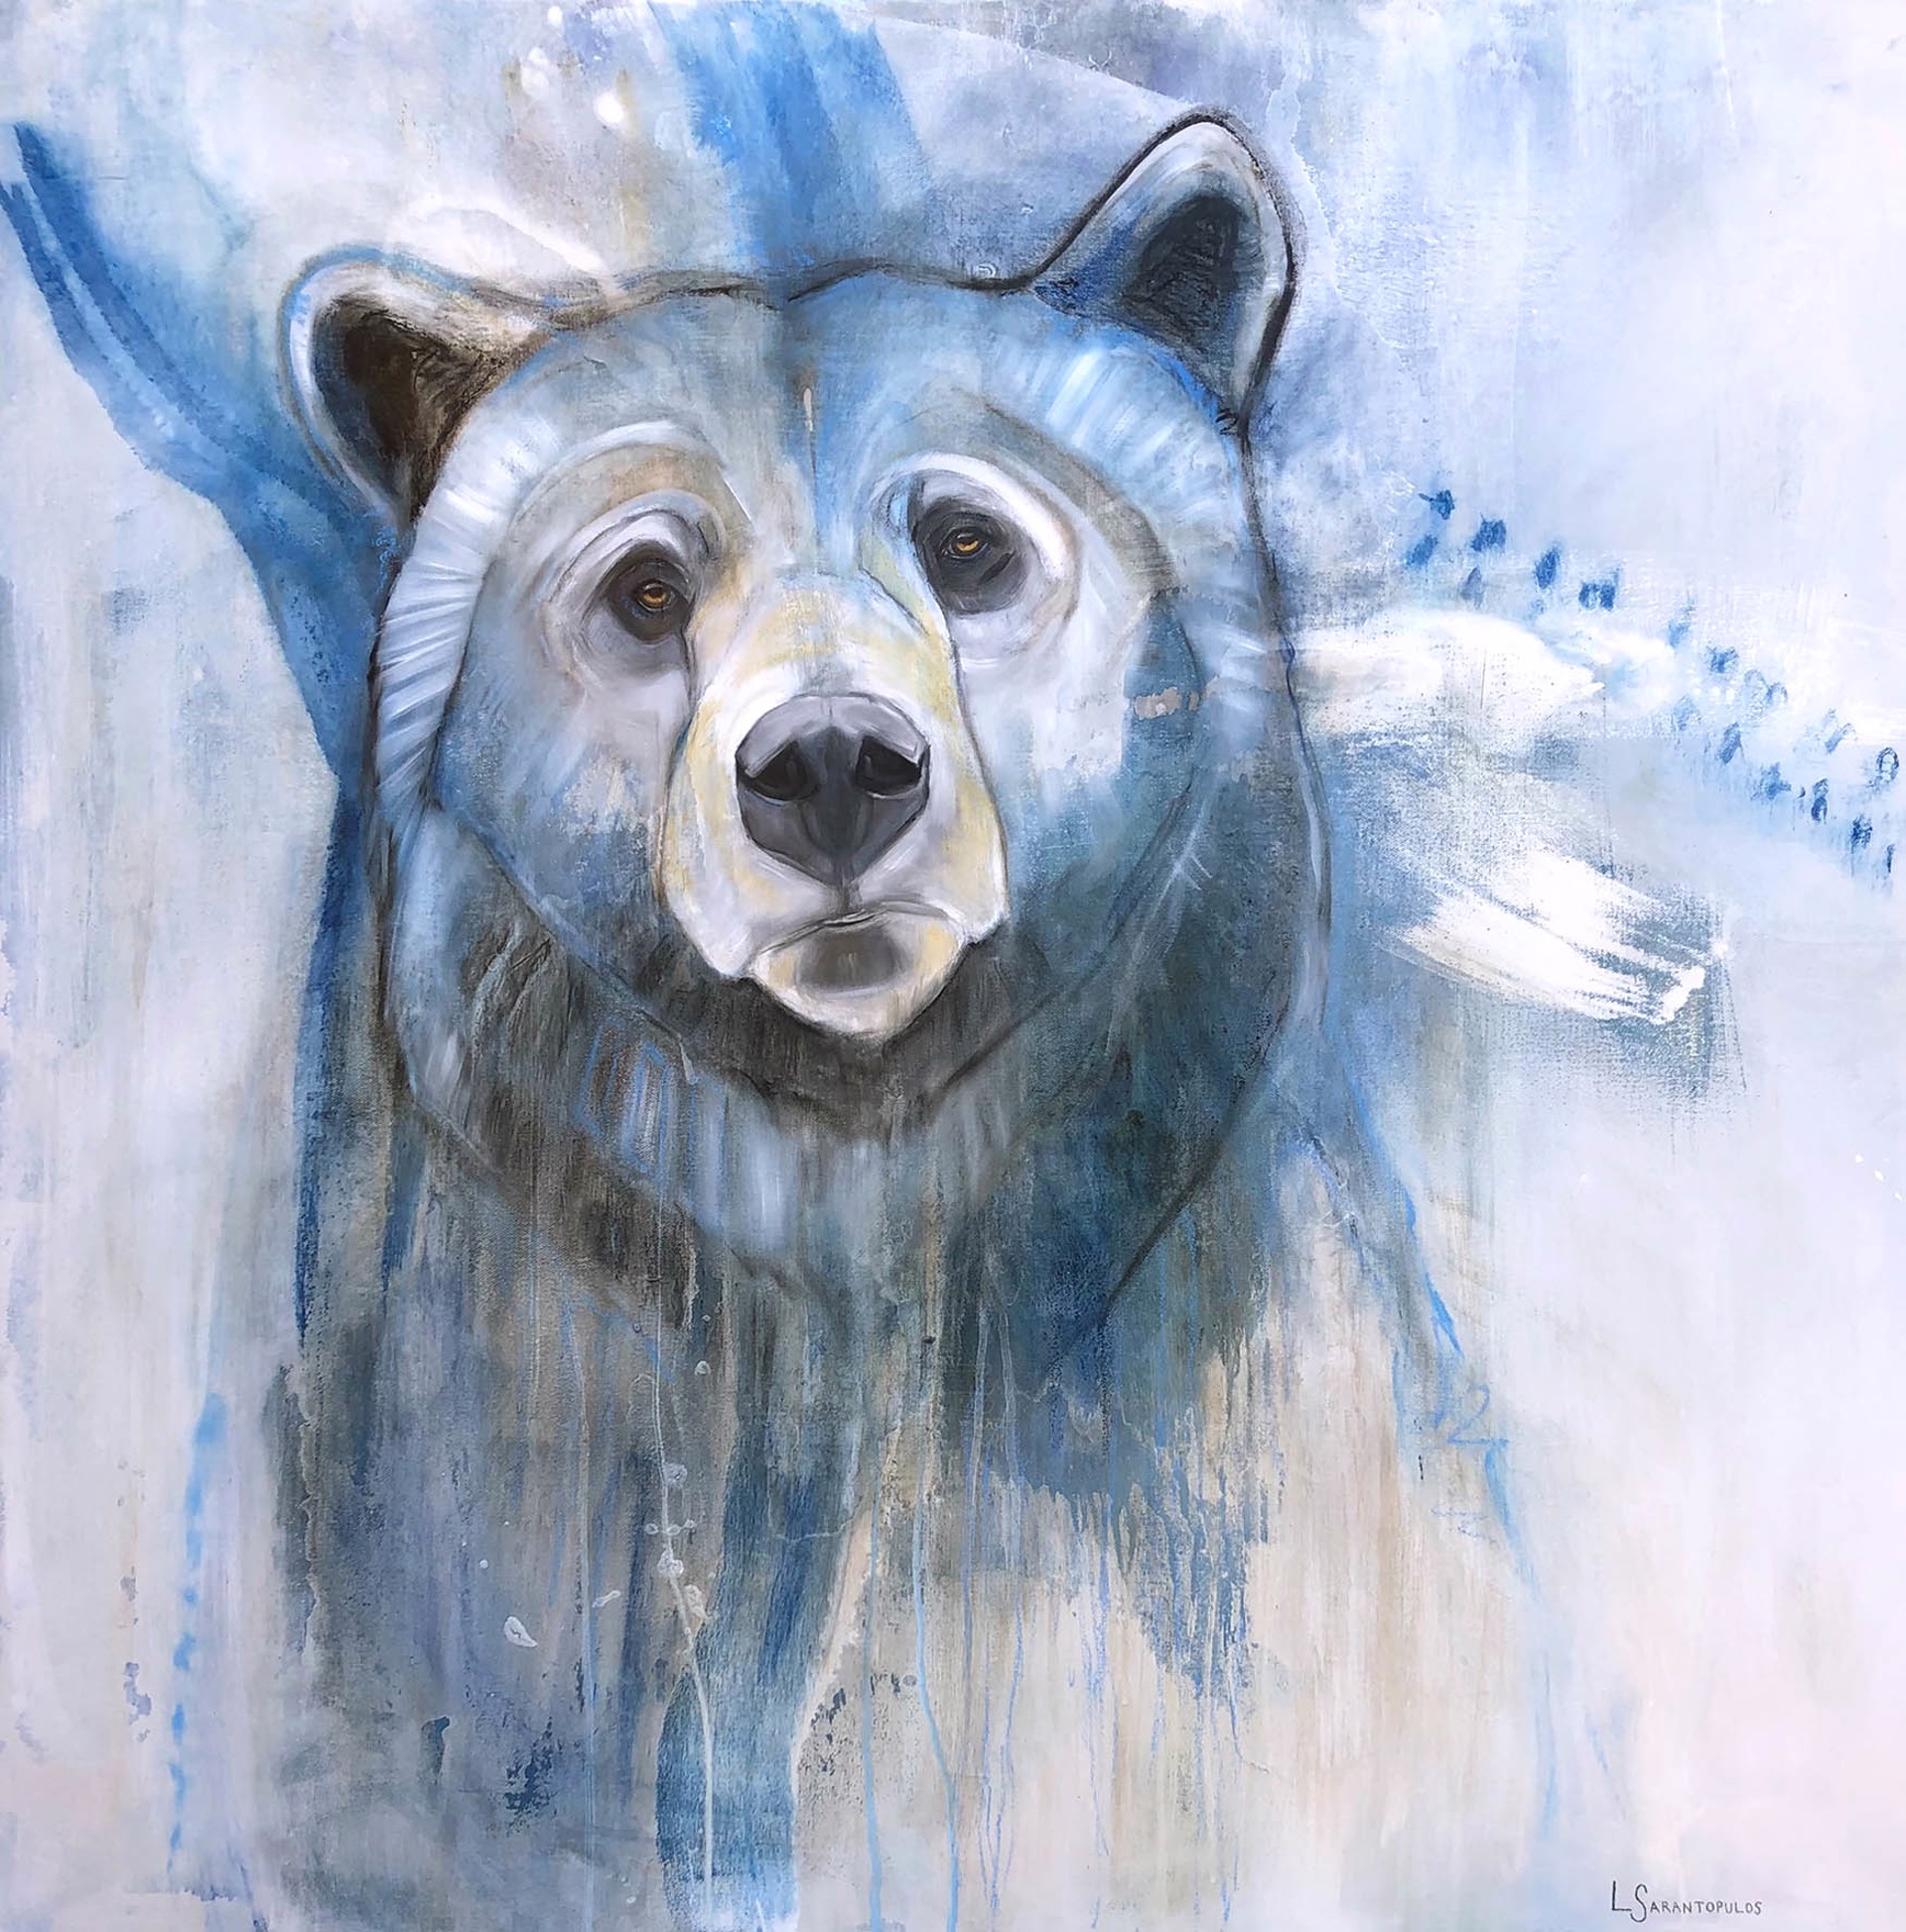 Original Mixed Media Painting Featuring  A Bear Head Fading Into Abstract Background In Blues and Grey